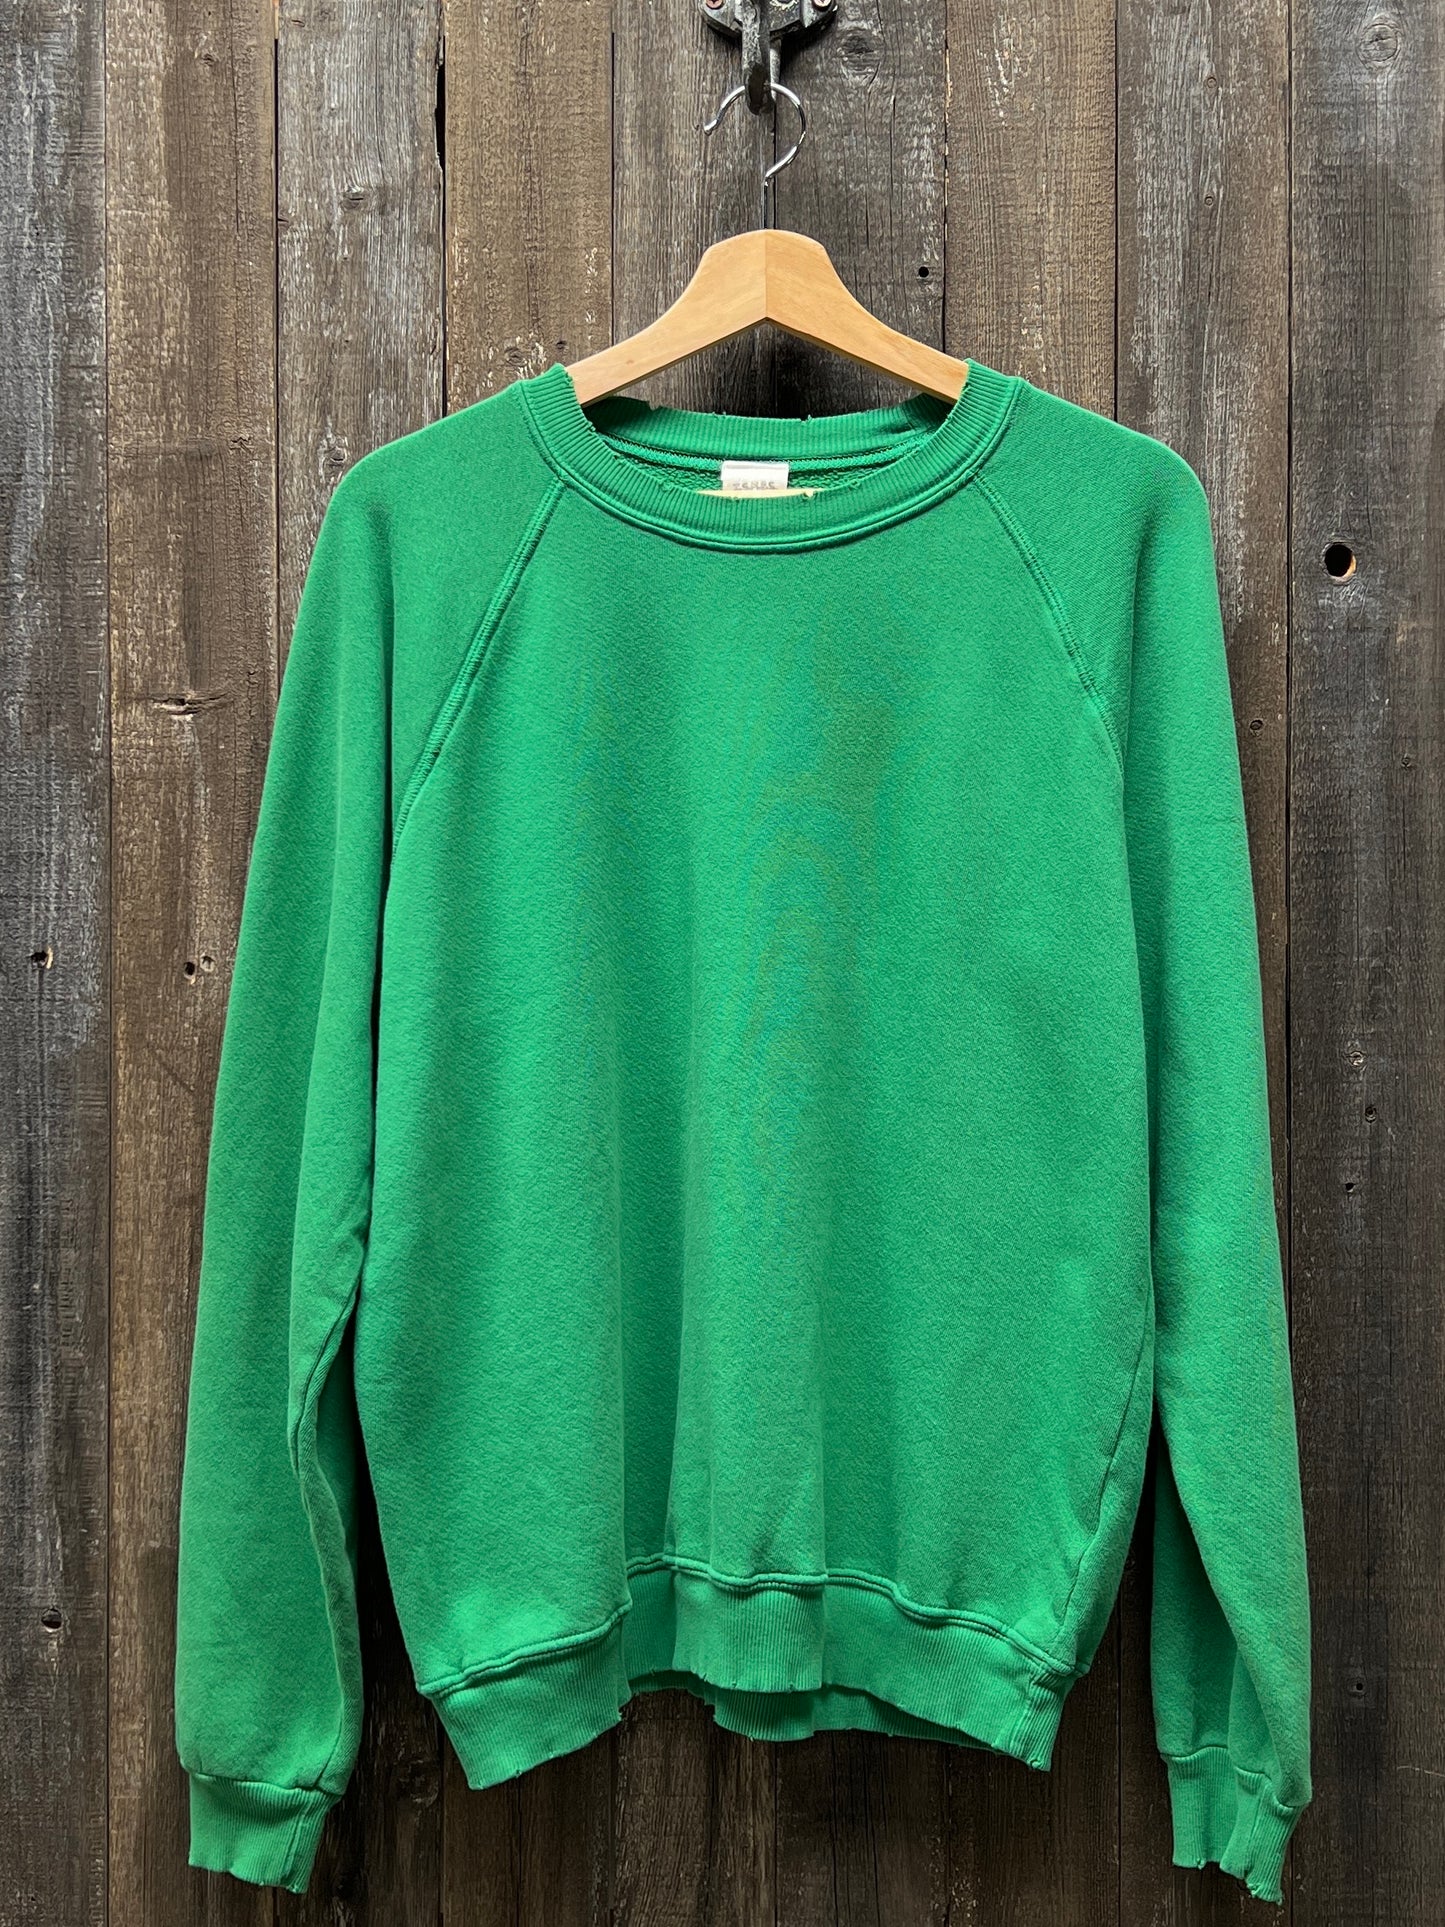 GREEN L/S SWEATS WITH CUSTOM HAND EMBROIDERY